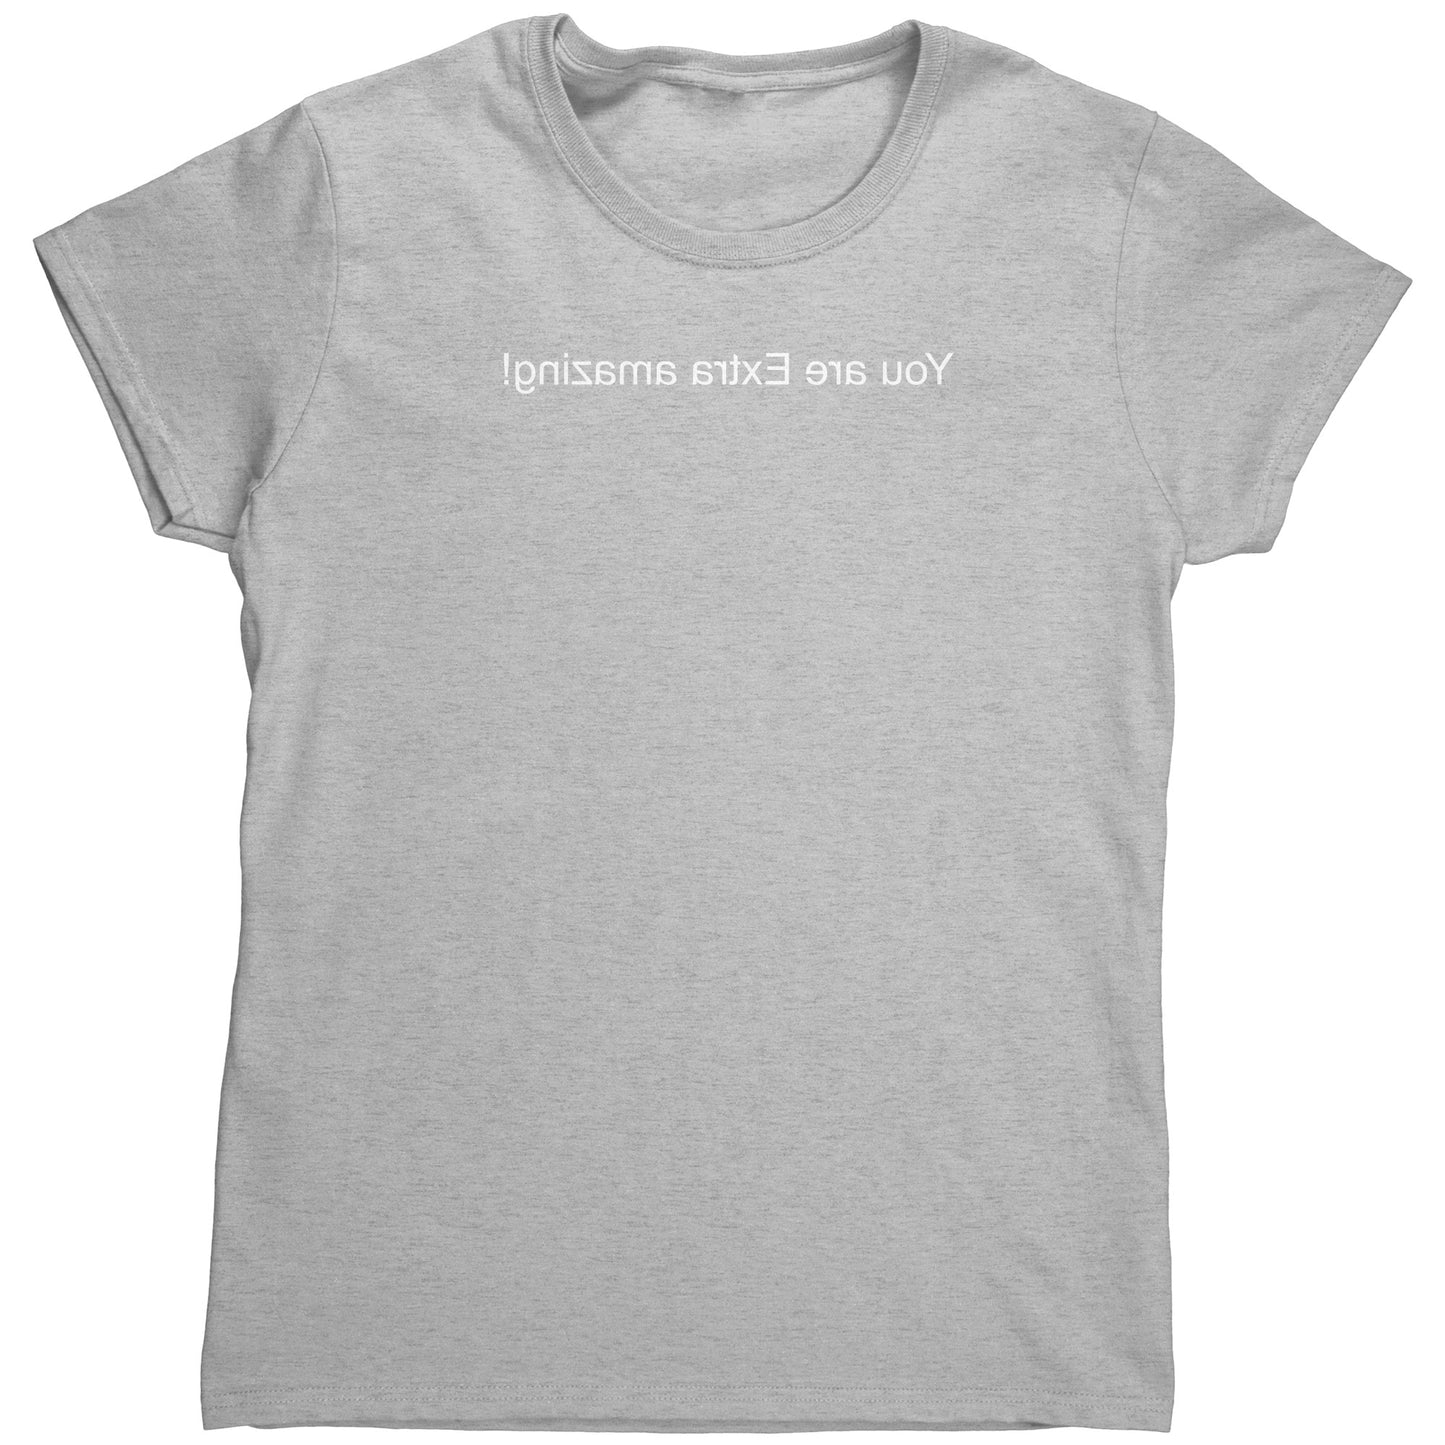 Extra Amazing Mirrored Women's Shirt with White Lettering